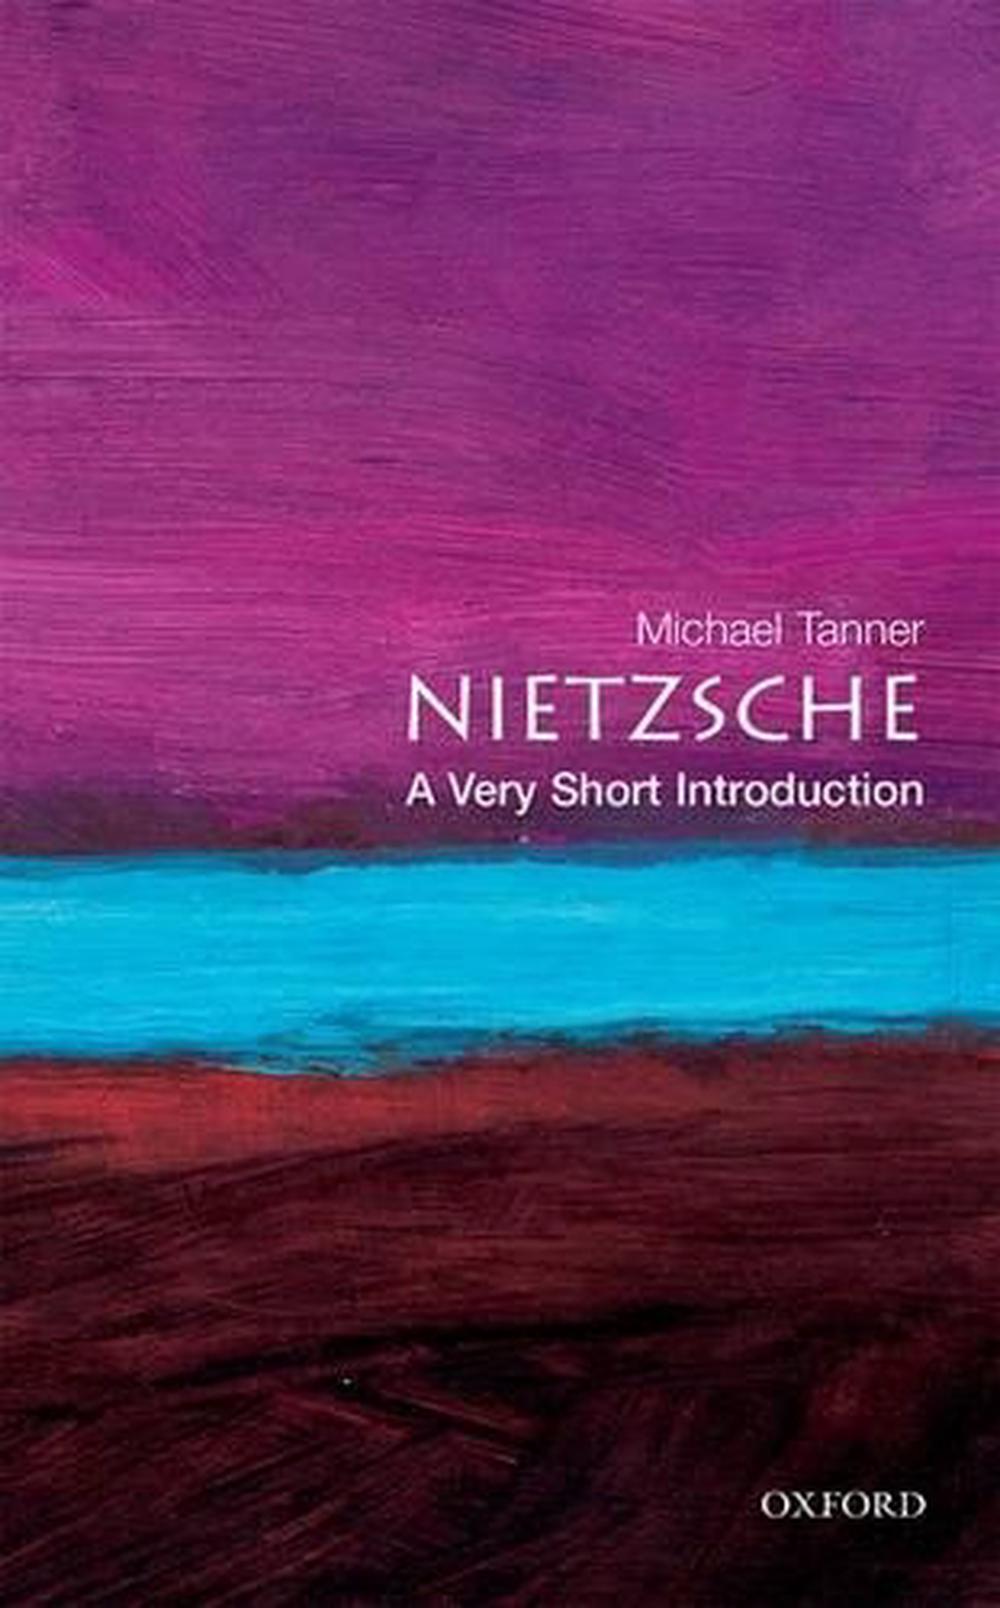 Tanner,　Very　Paperback,　The　Short　Introduction　at　by　Michael　online　9780192854148　Buy　A　Nietzsche:　Nile